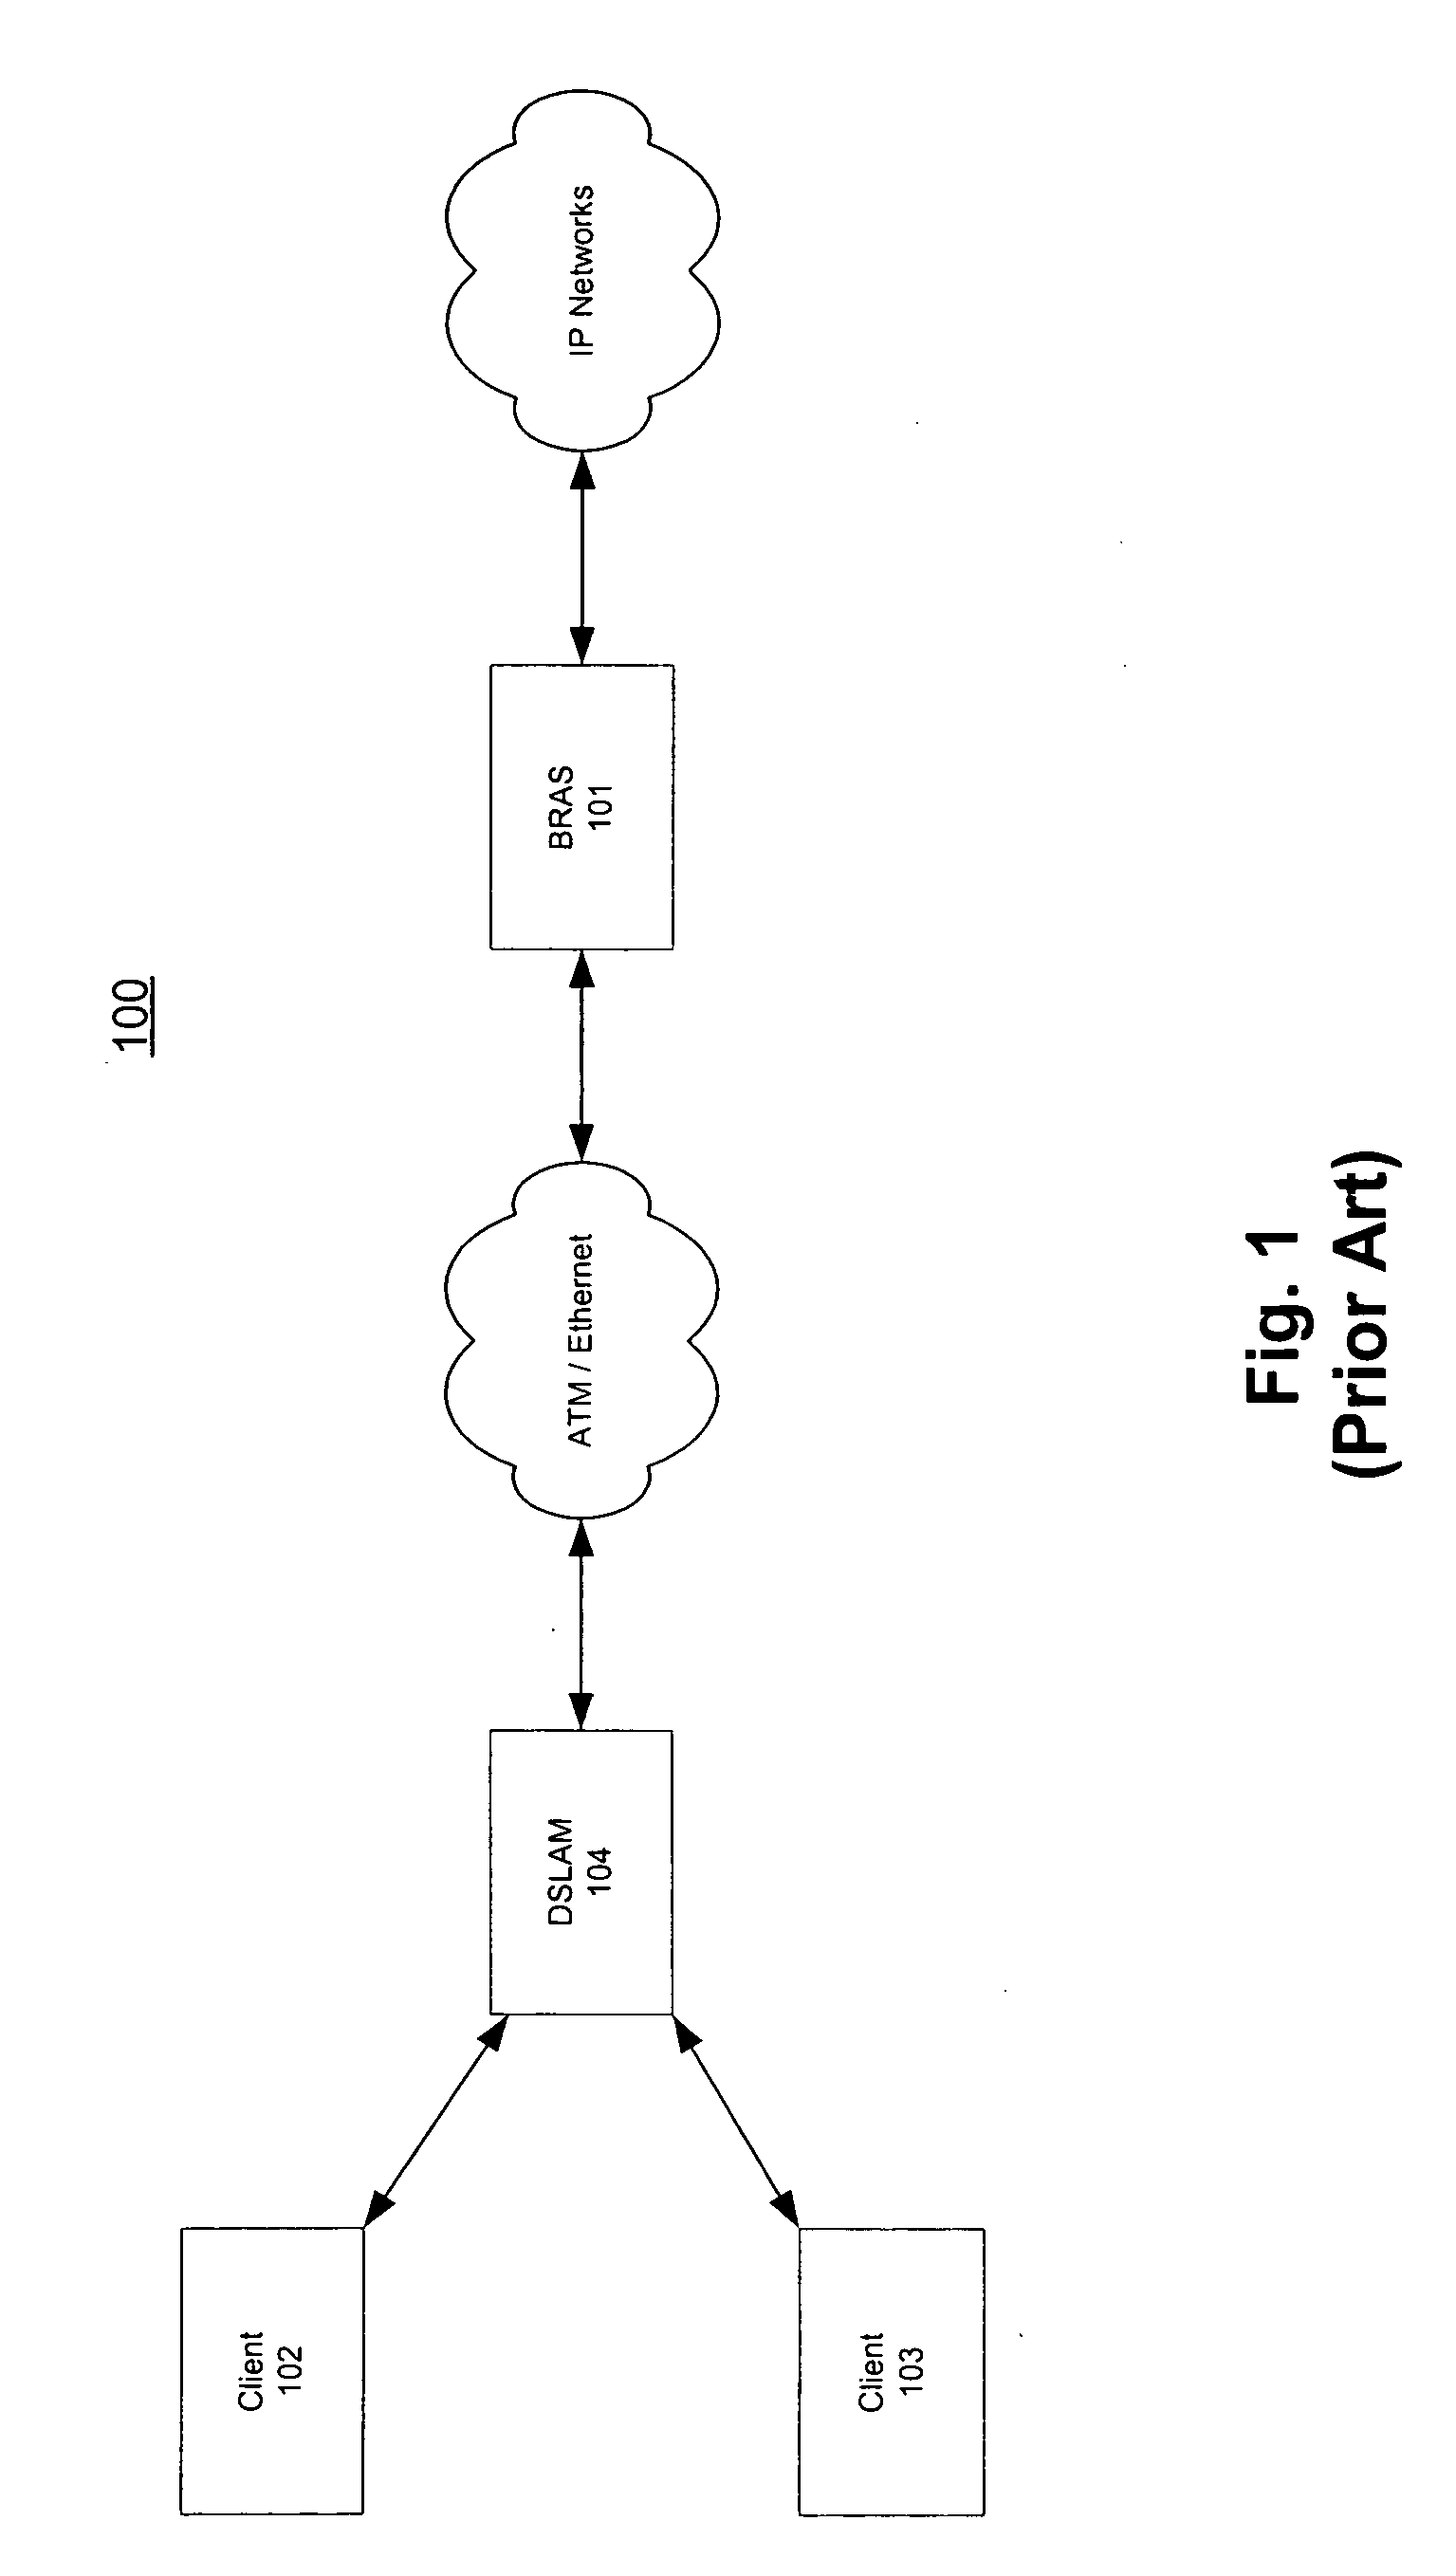 Protocol for messaging between a centralized broadband remote aggregation server and other devices